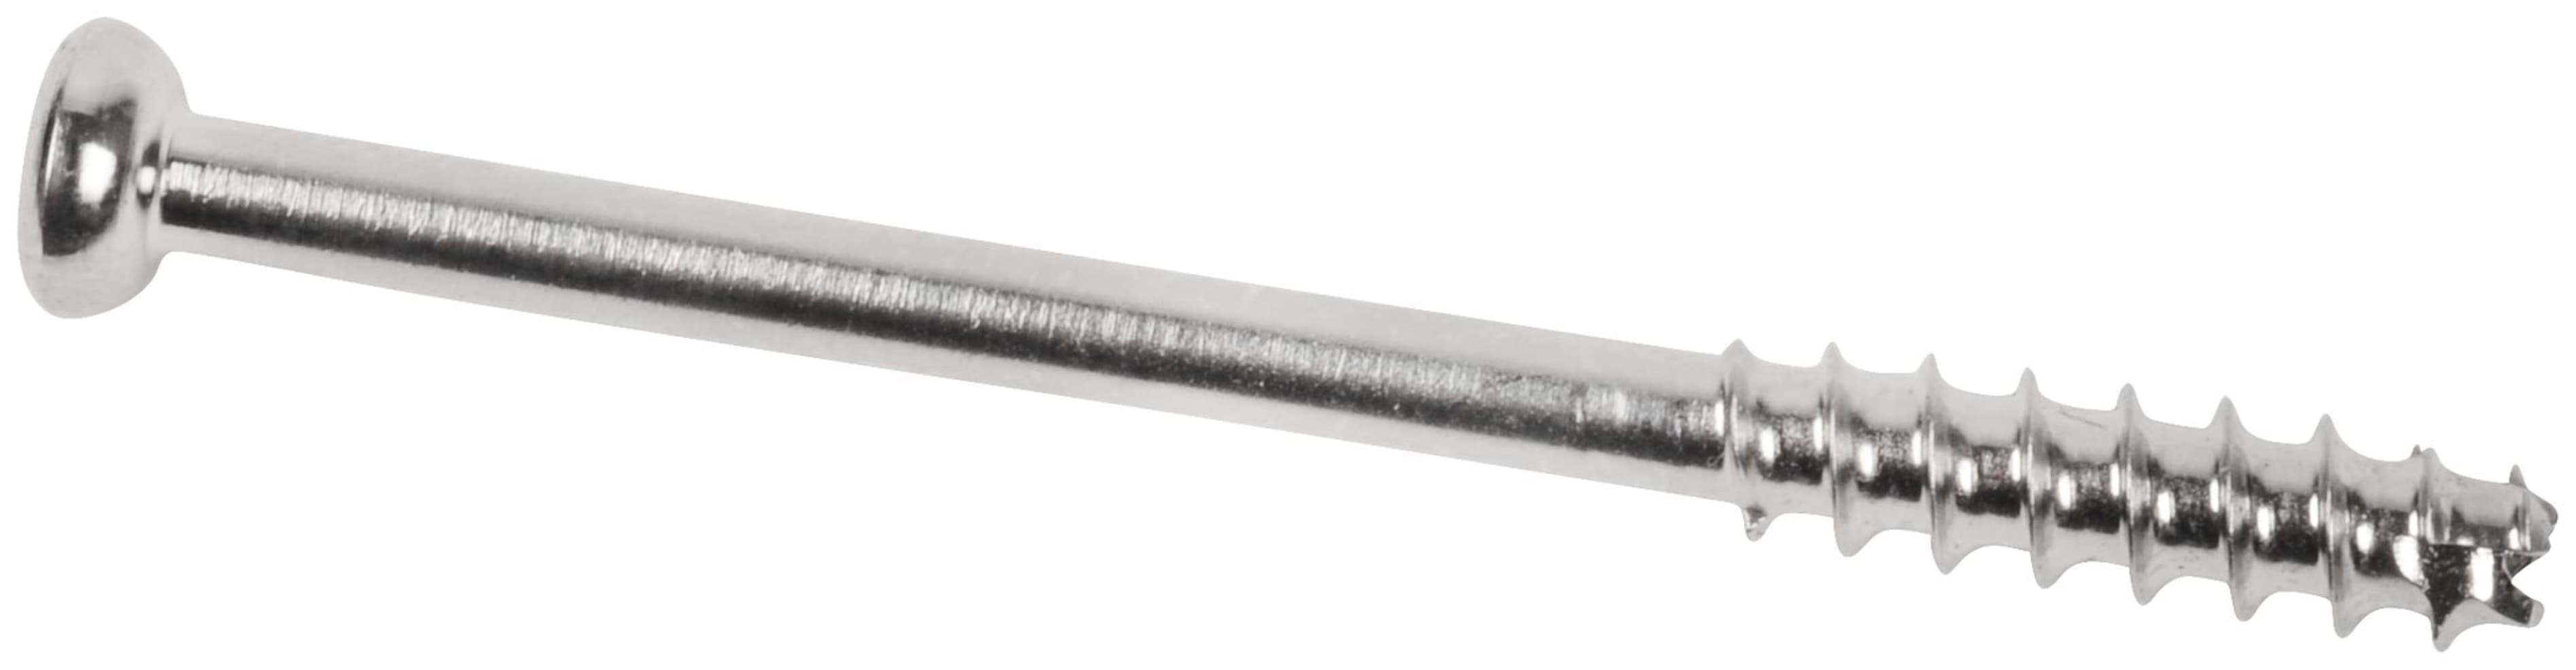 Low Profile Screw, SS, 4.0 x 45 mm, Cannulated, Short Thread